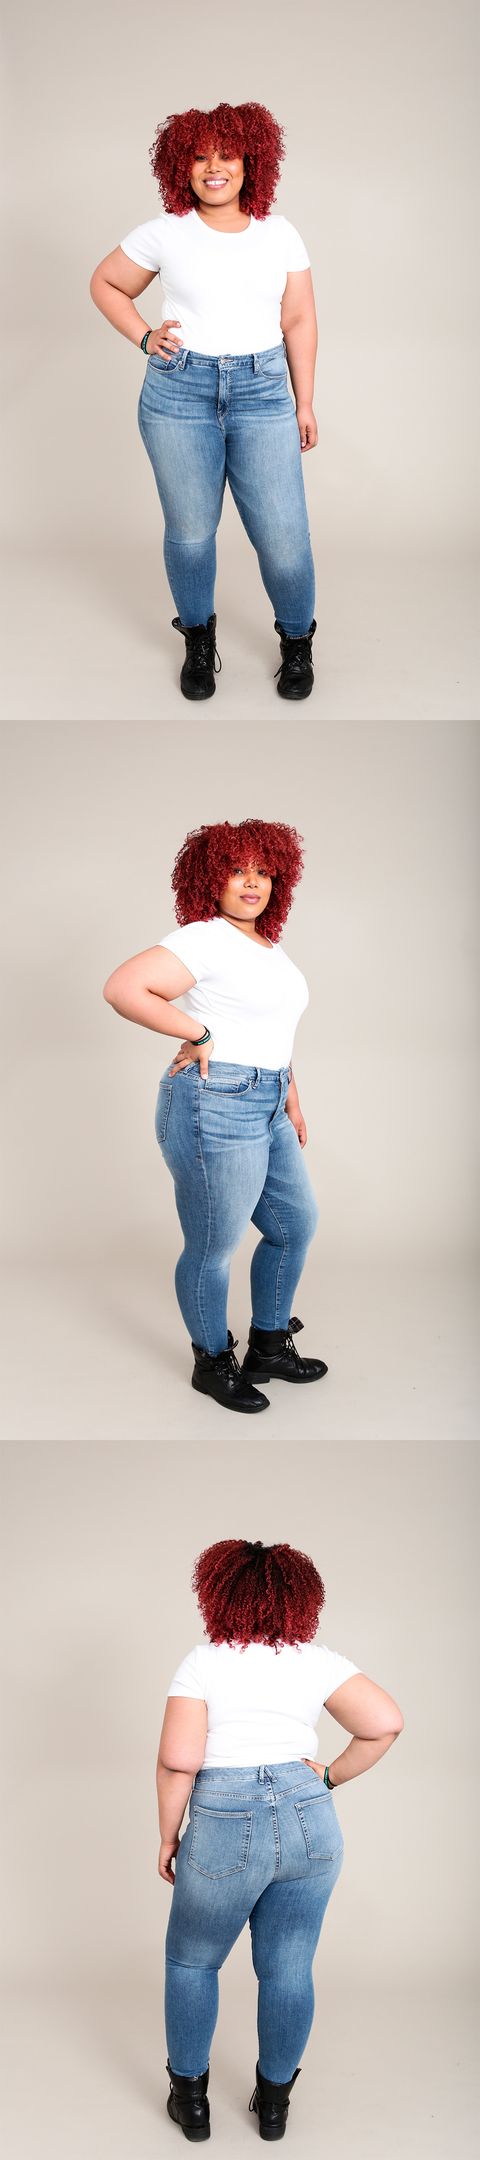 Hair, Jeans, Blue, White, Clothing, Denim, Shoulder, Standing, Hairstyle, Red hair, 